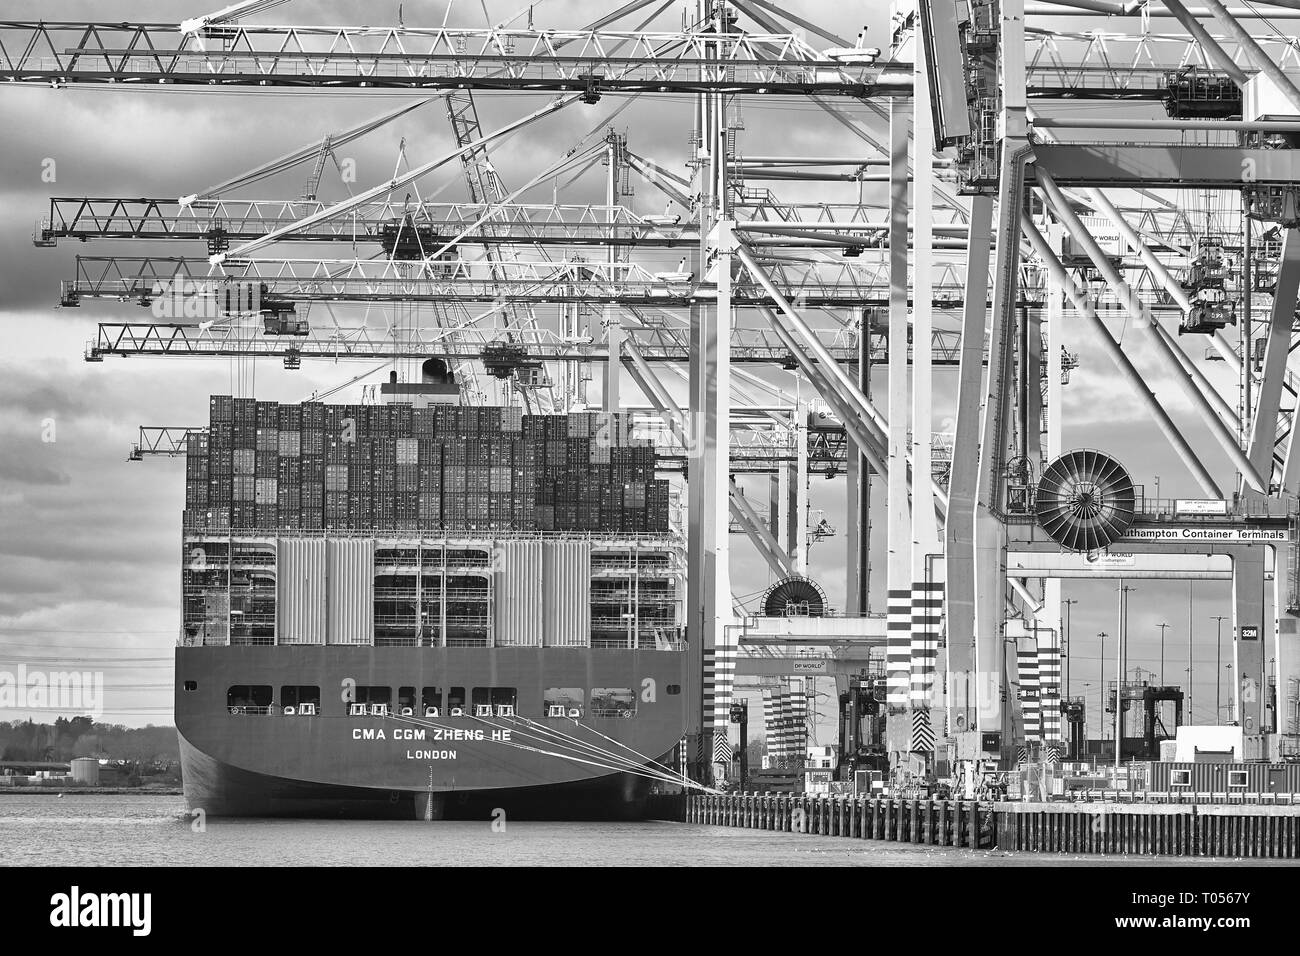 Black & White Photo Of The Giant CMA CGM ZHENG HE, 400 Metre, 17859 TEU, Container Ship, Loading And Unloading In The Southampton Container Terminal. Stock Photo